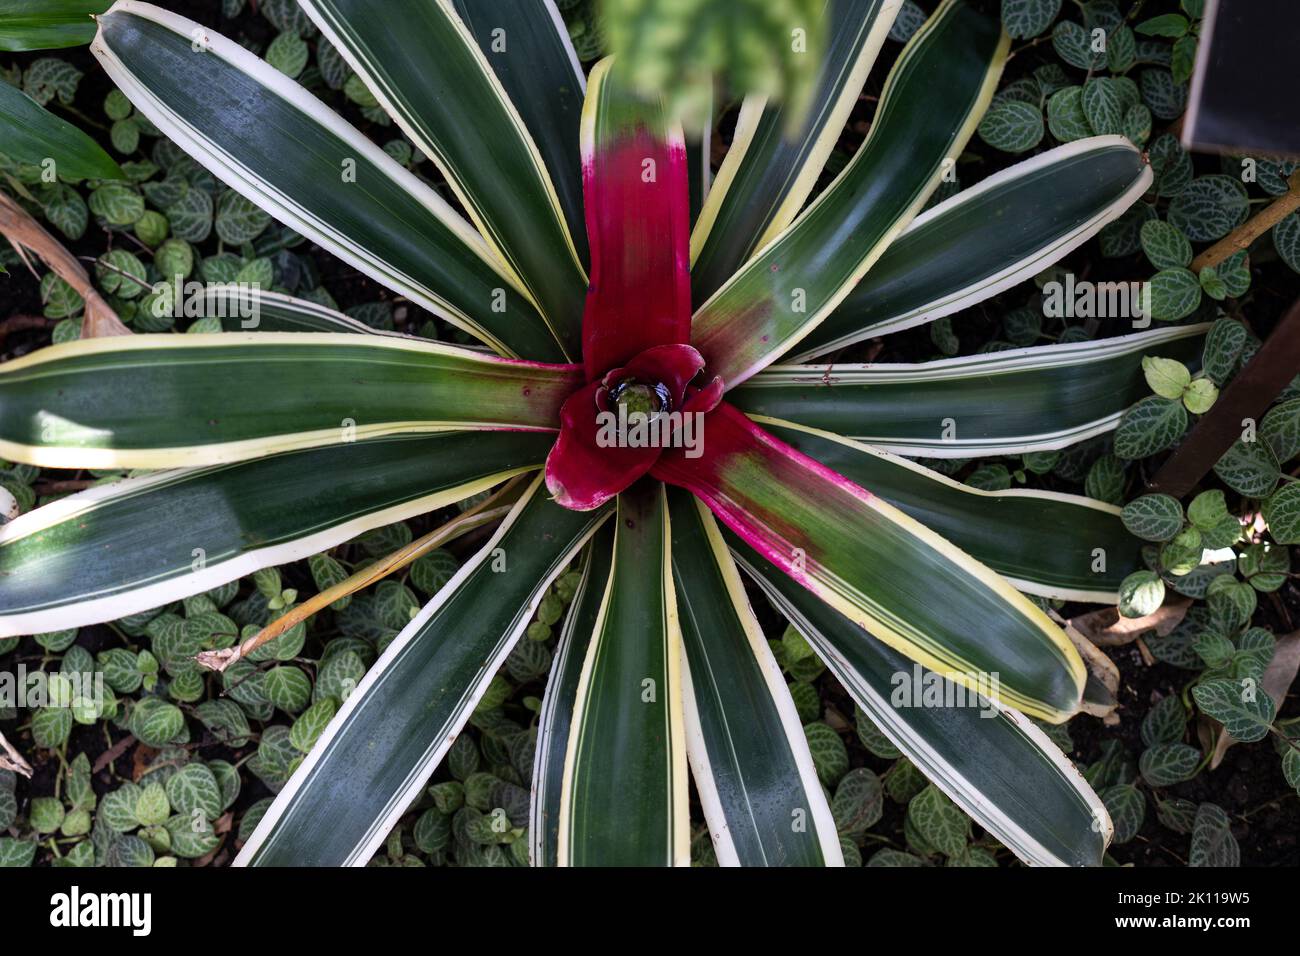 Top view of a tropical plant called Neoregelia in the Bromeliad flower family Stock Photo